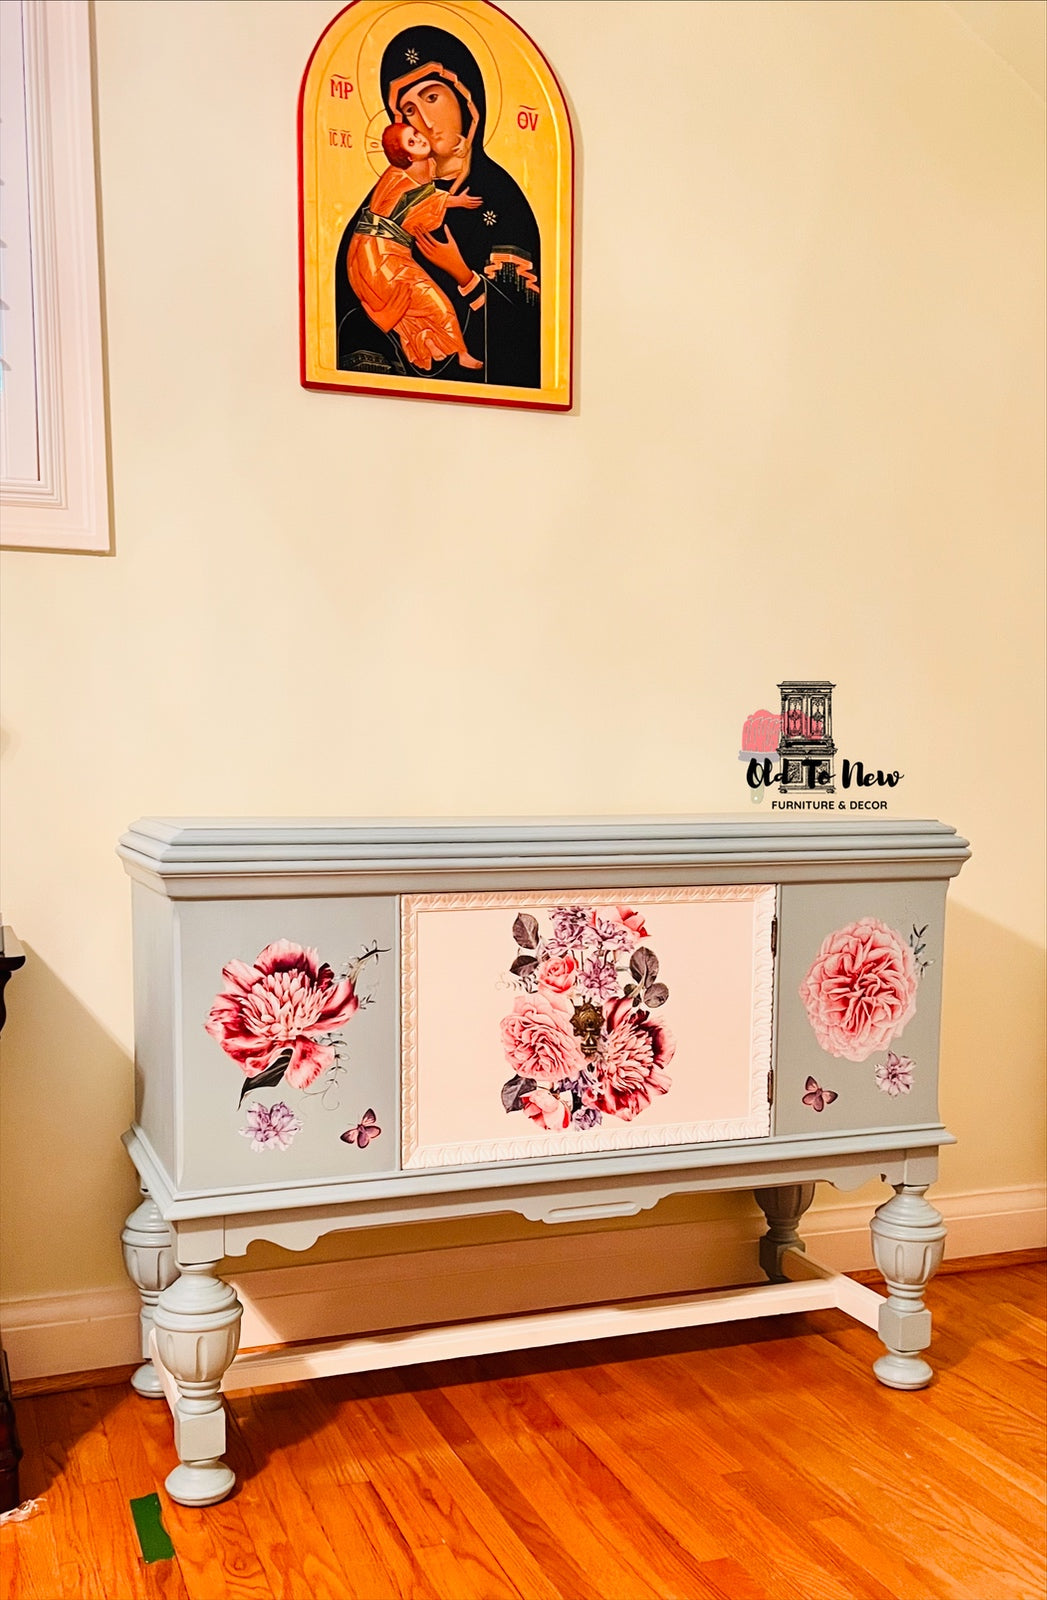 Refinished Sideboard, Hokus Pokus Le Bouquet Transfer; Old to New Furniture & Decor 